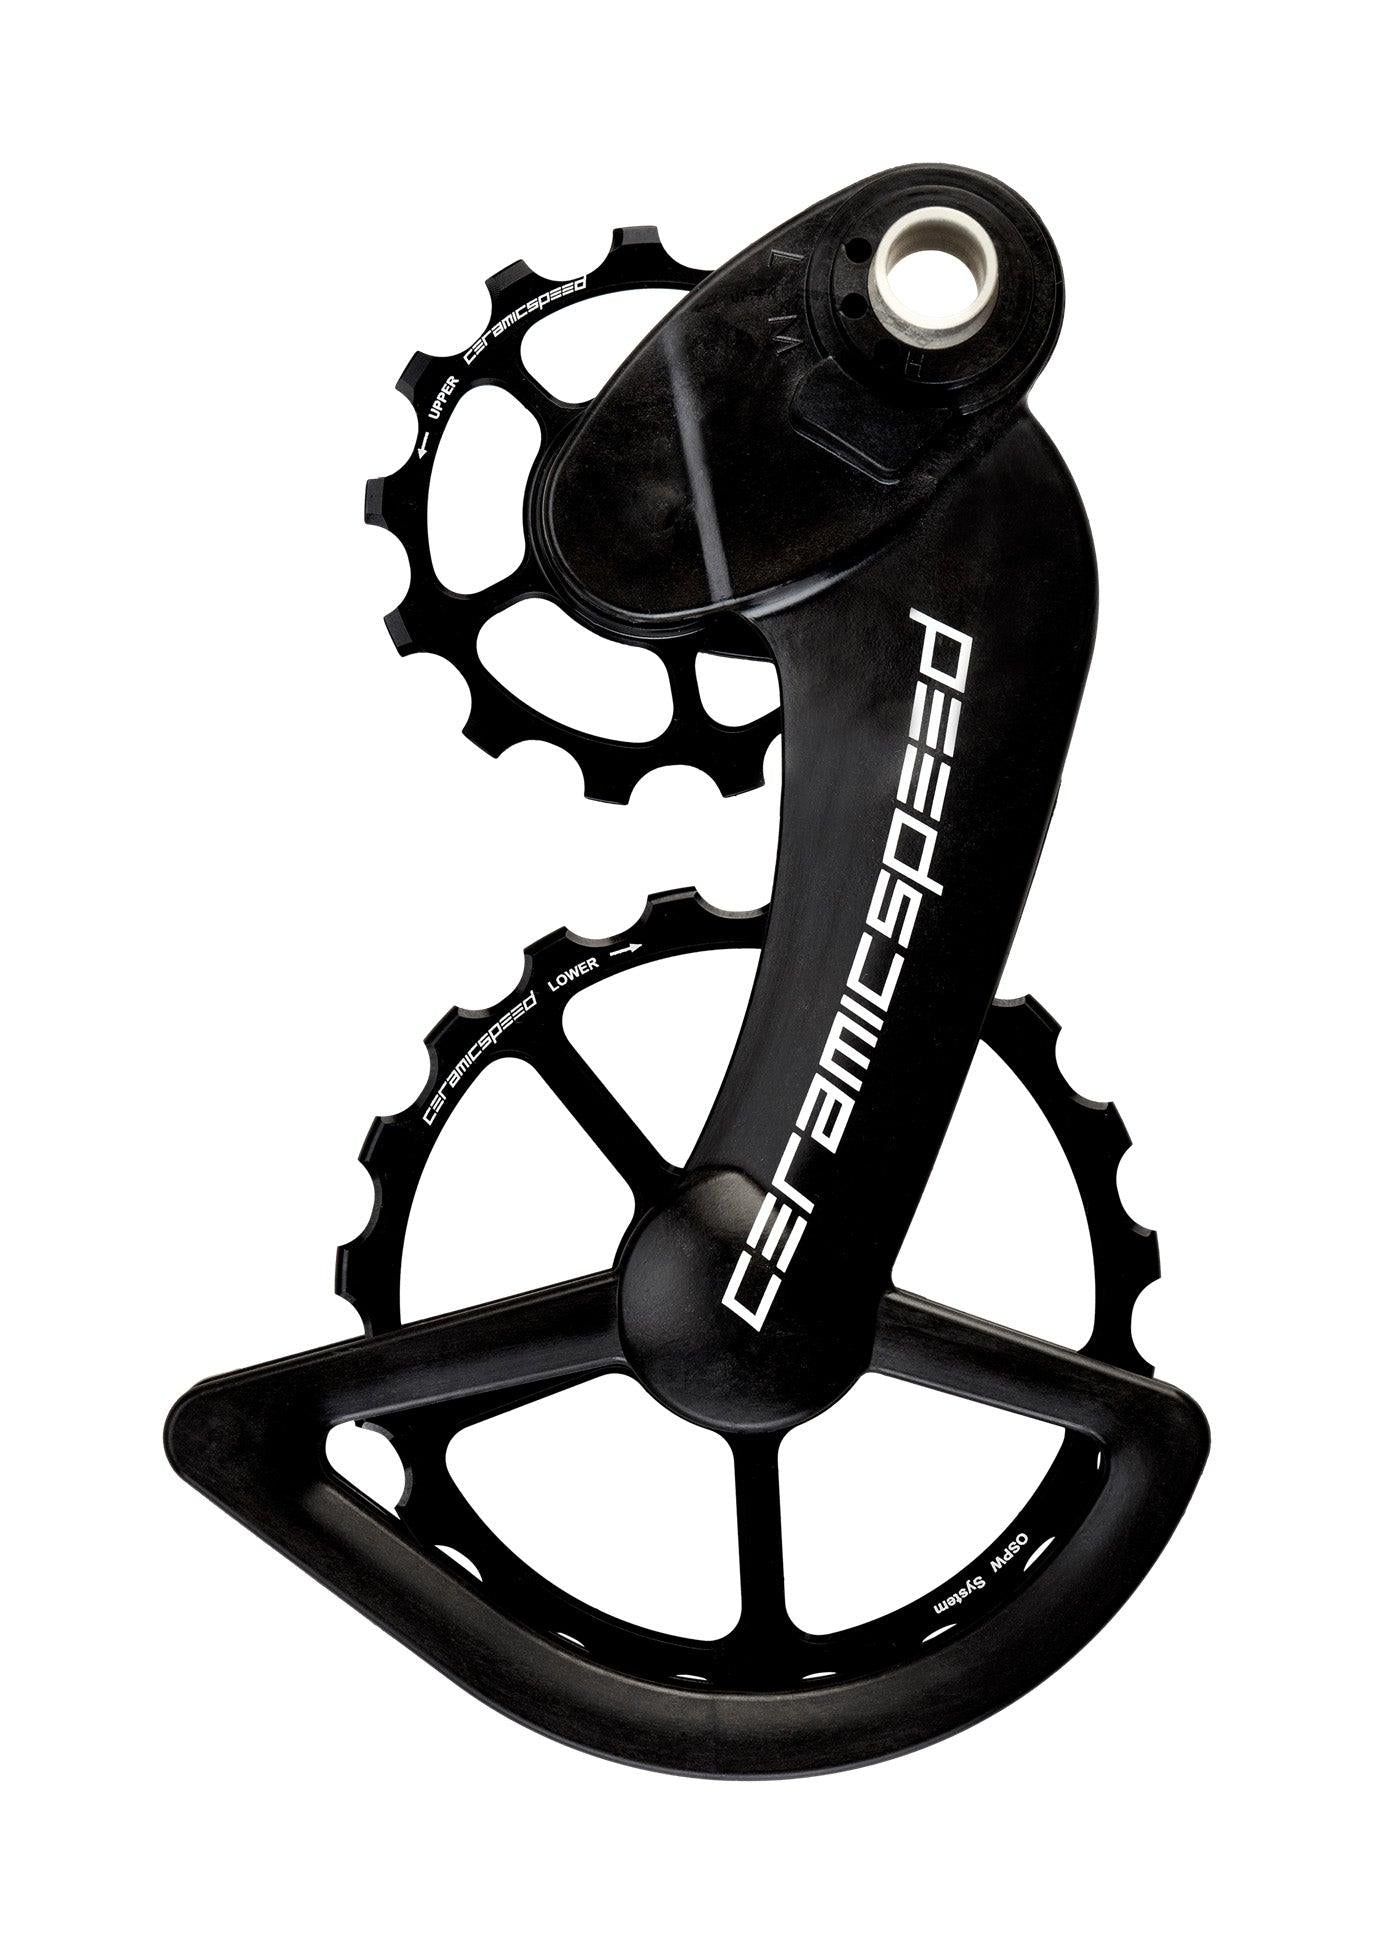 CeramicSpeed OSPW System Campagnolo EPS 12 speed - Sprocket & Gear